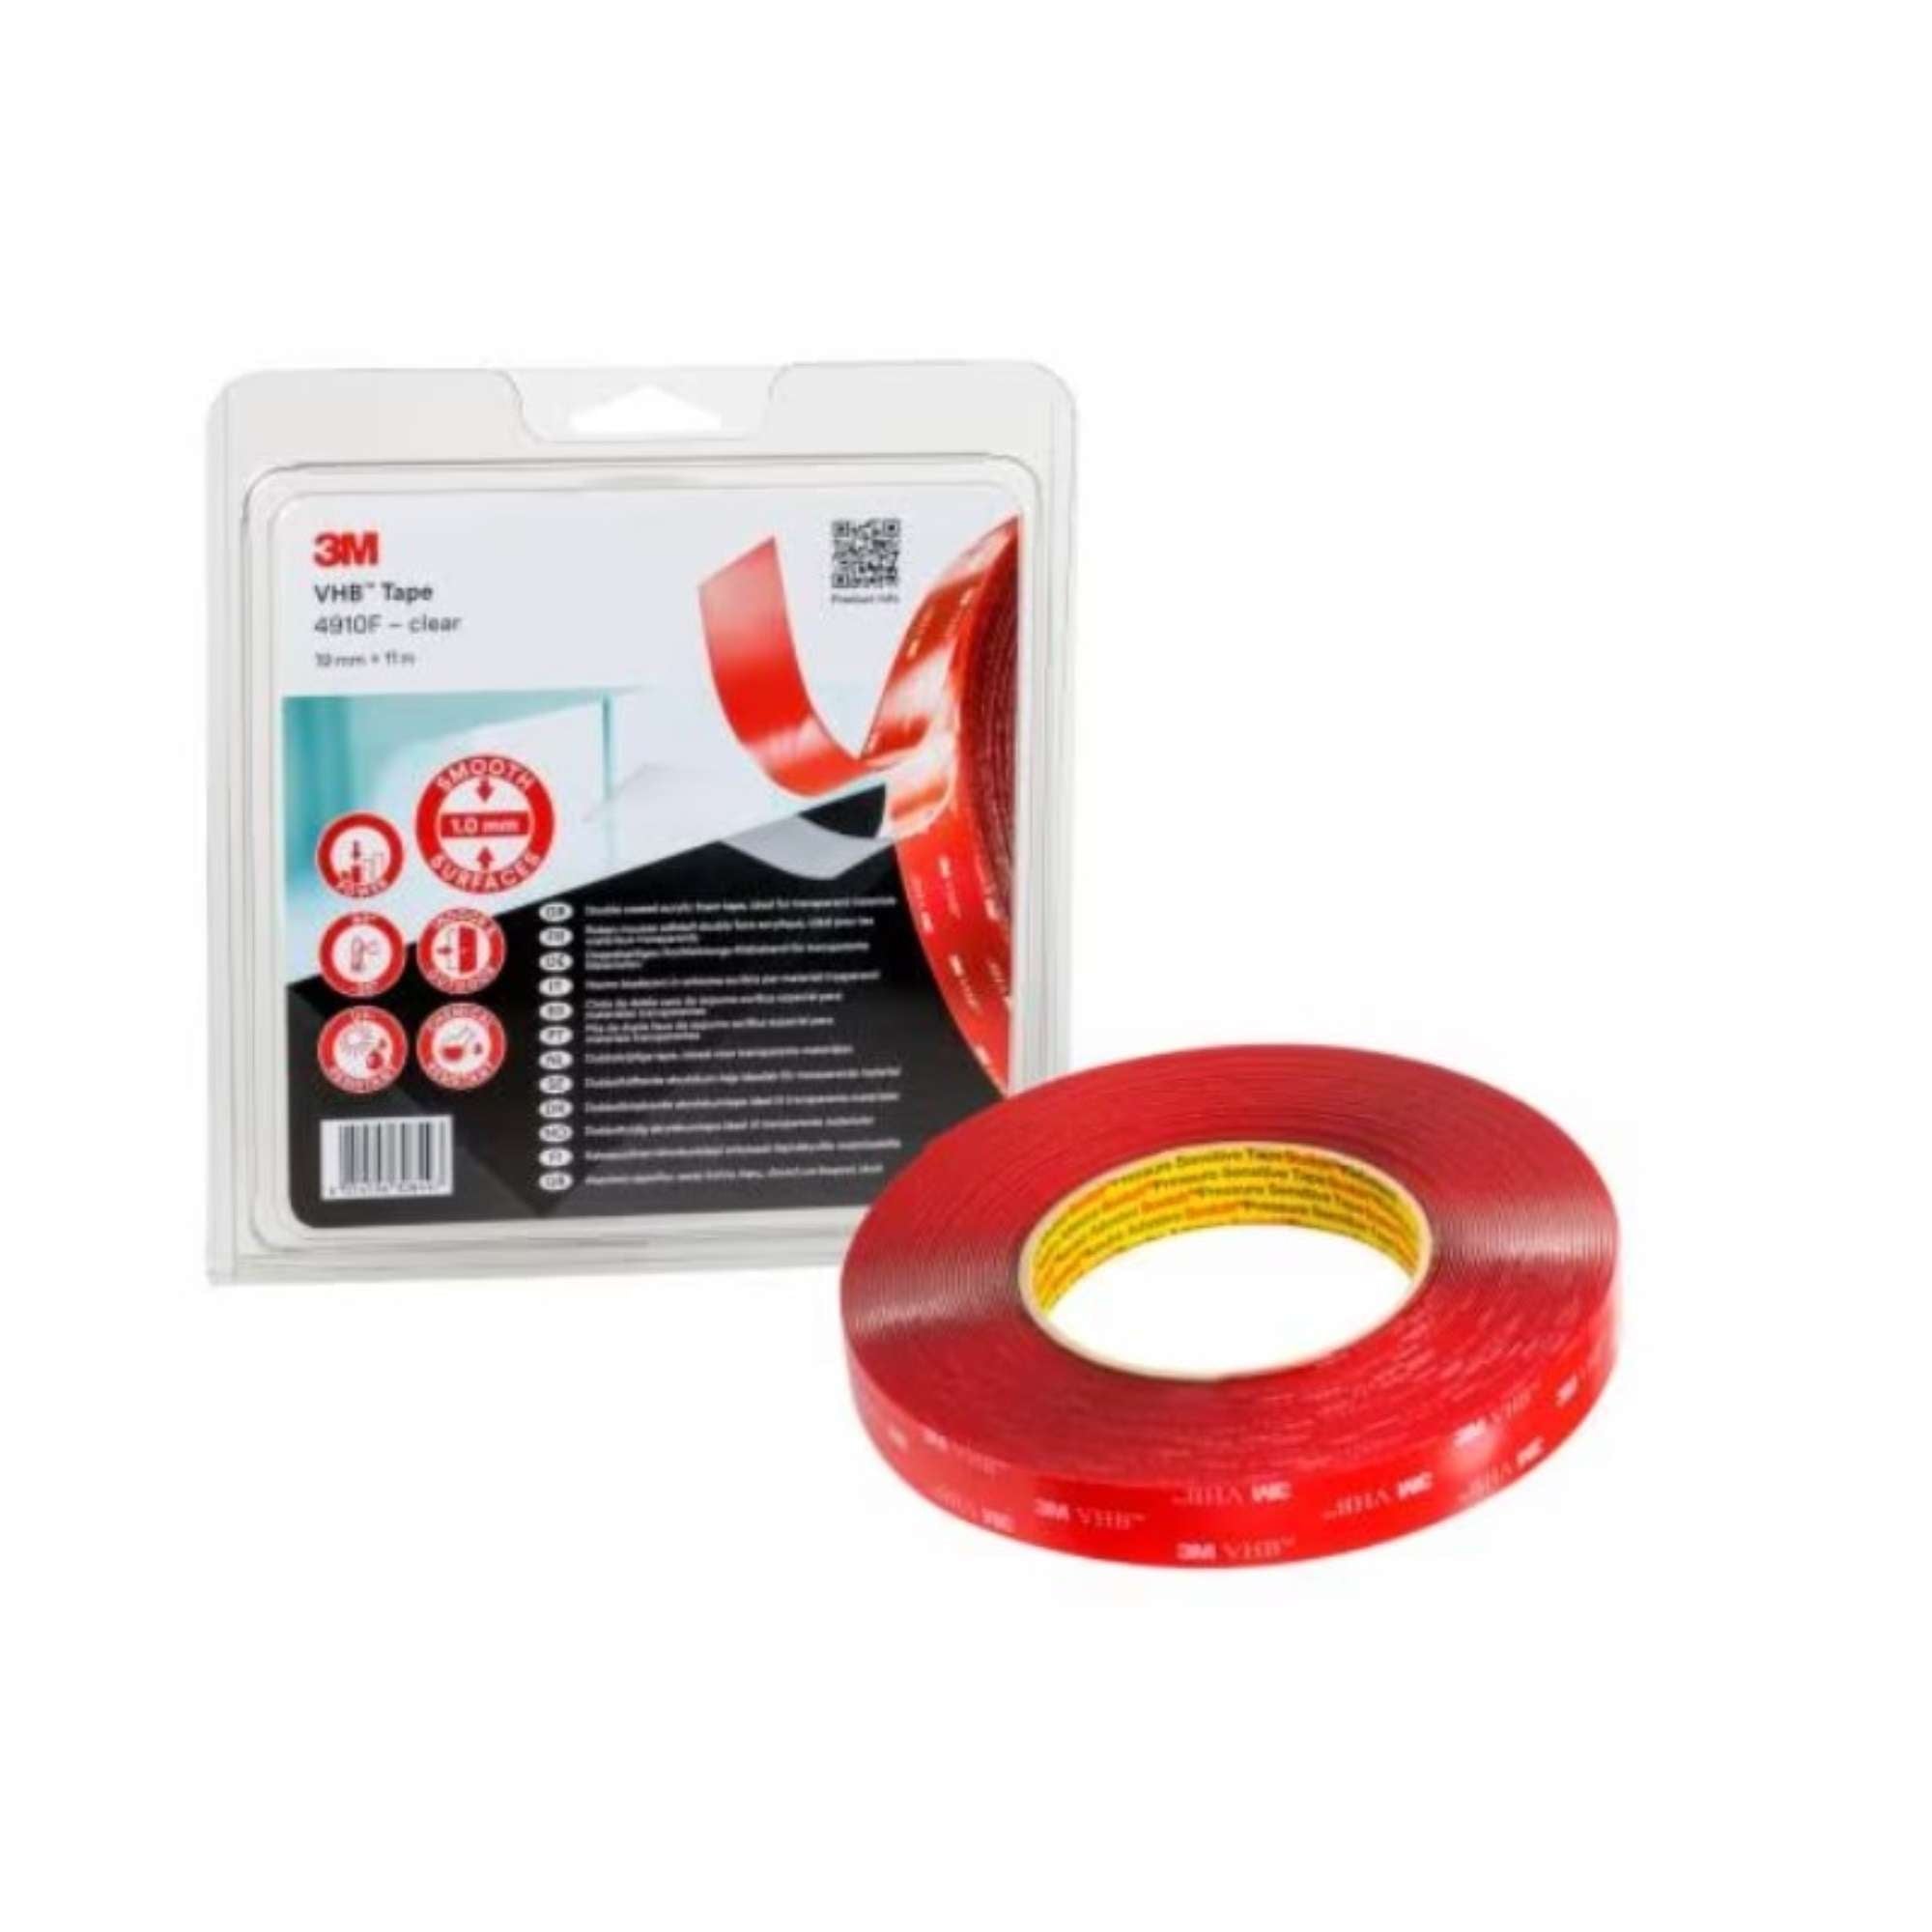 Transparent double-sided tape 19mm x 11mt x 0.1mm - 3M 4910F 7100123355